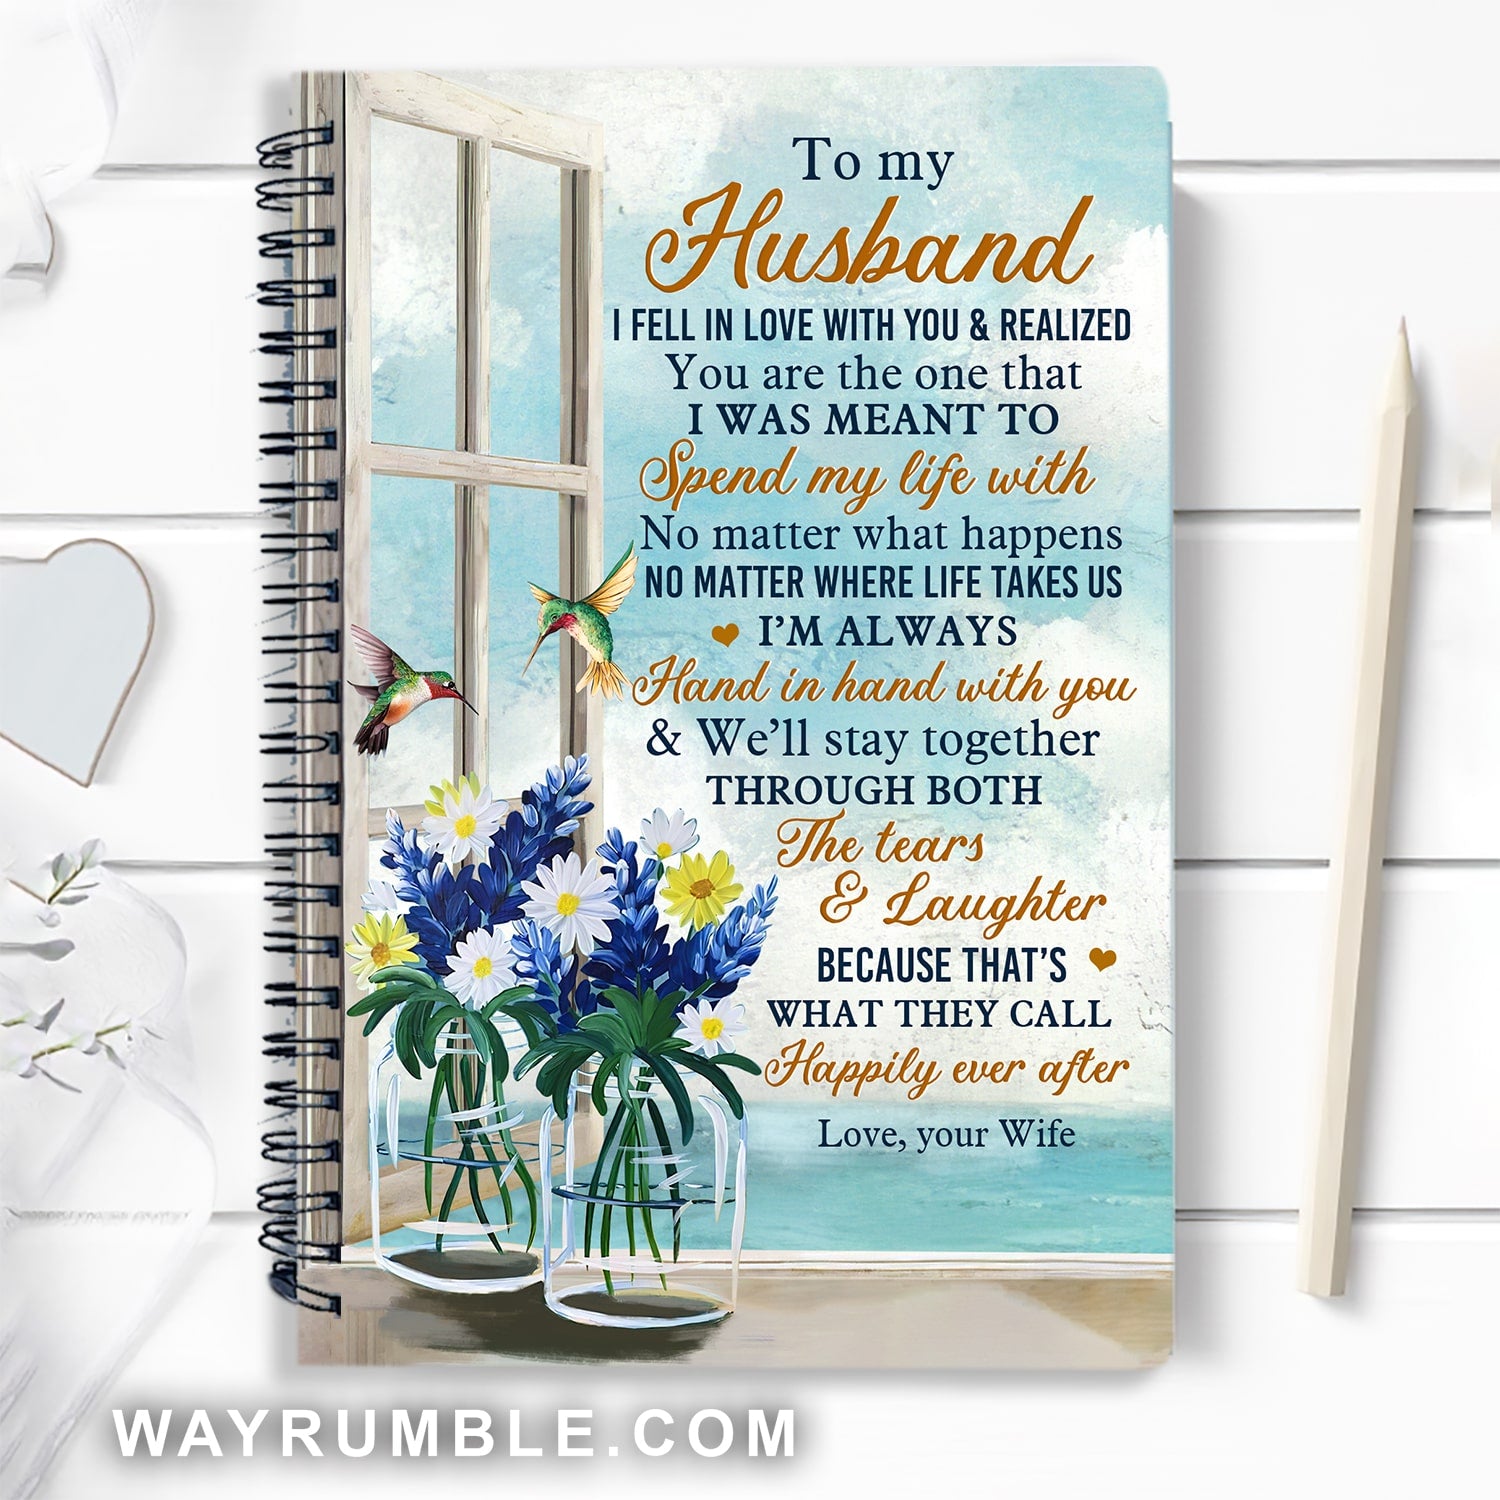 To my husband, We'll stay together through both tears and laughter - Window frame, Hummingbird Spiral Journal